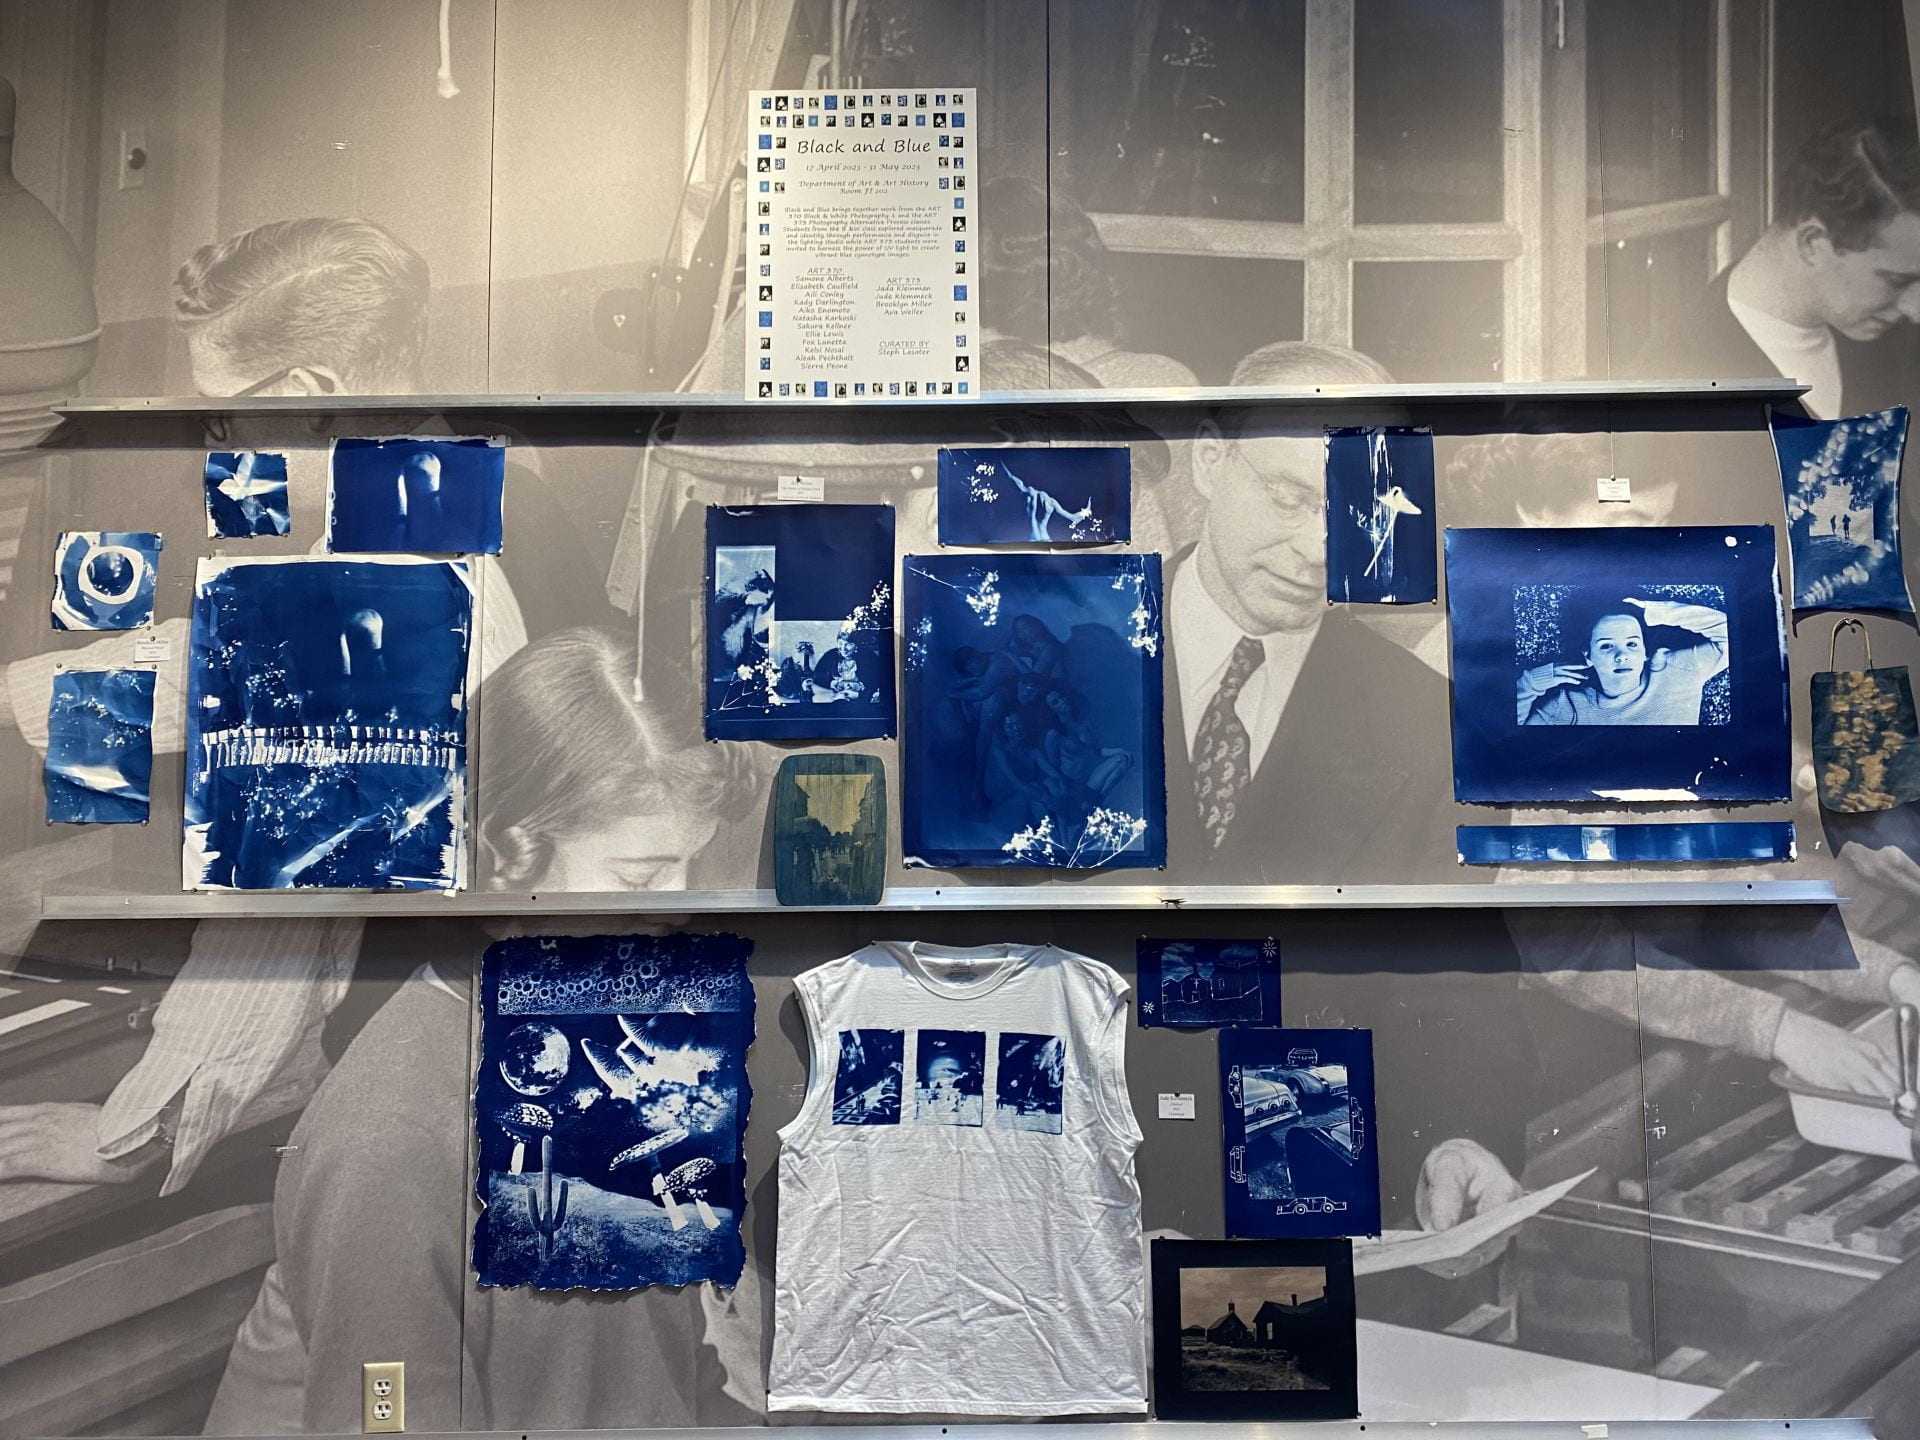 Several cyanotype pieces on display, a large white t-shirt with cyanotype prints takes center stage